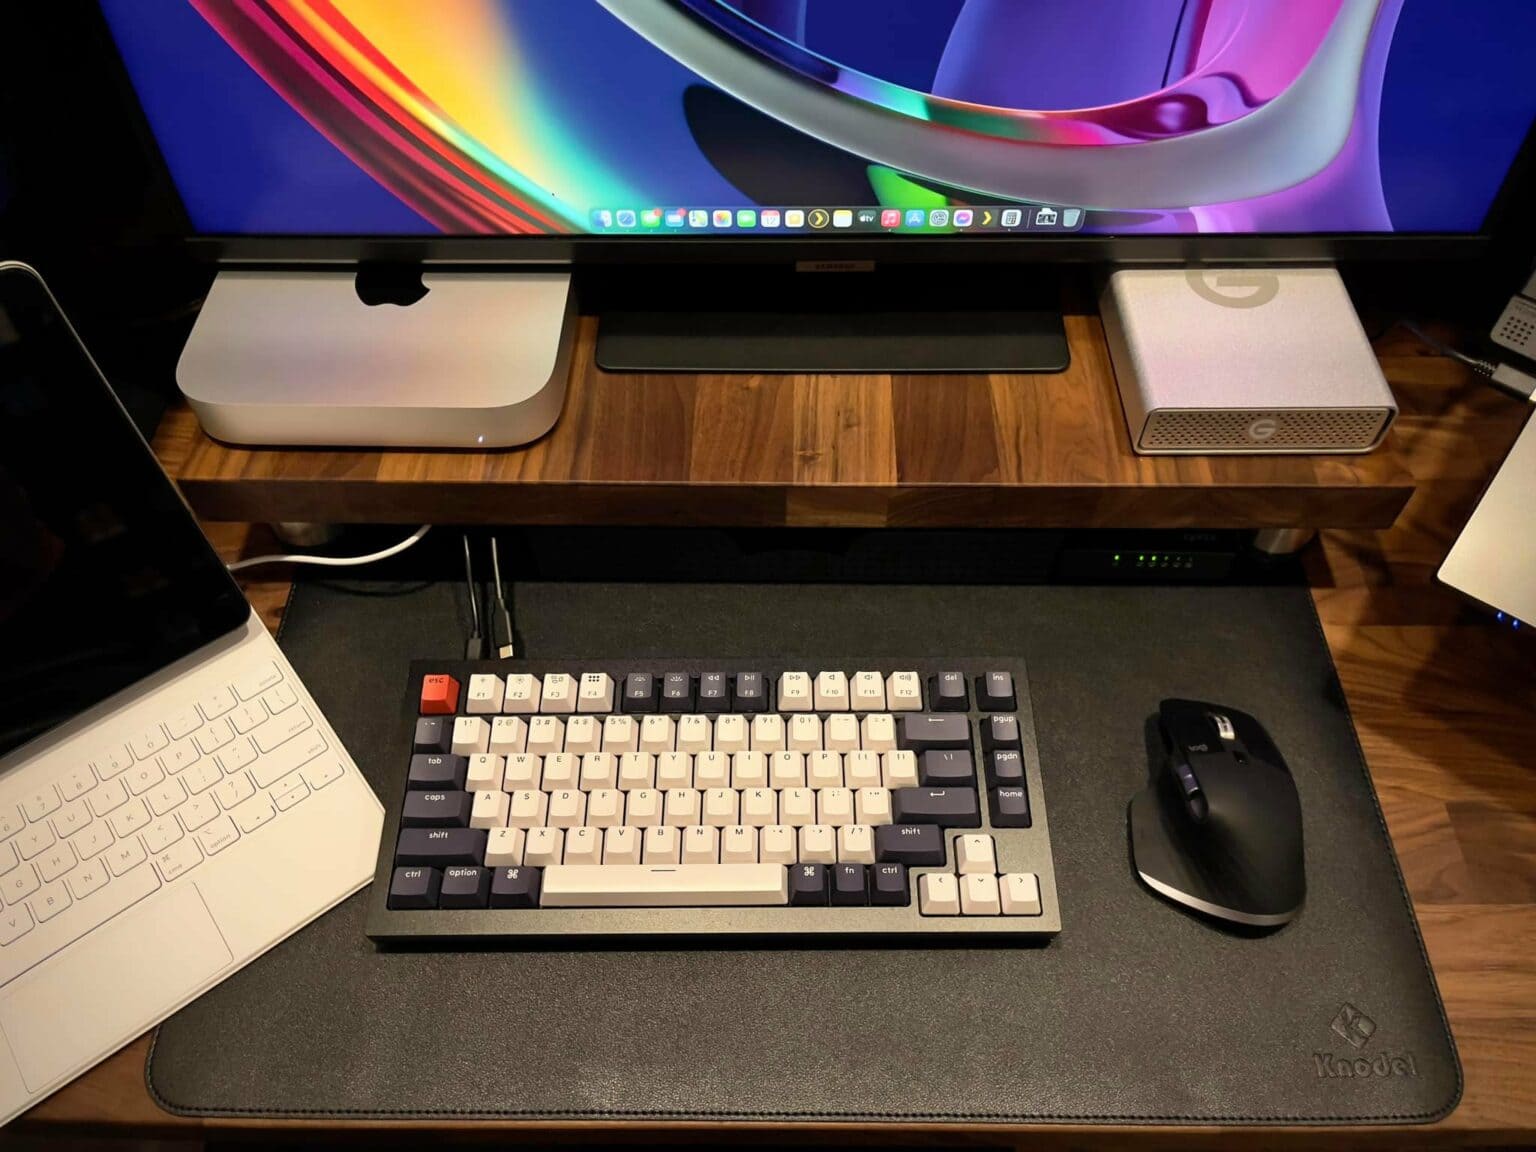 The M1 Mac mini is paired with a 32-inch Samsung 4K monitor, a Keychron Q1 mechanical keyboard and a Logitech MX Master 3 mouse.